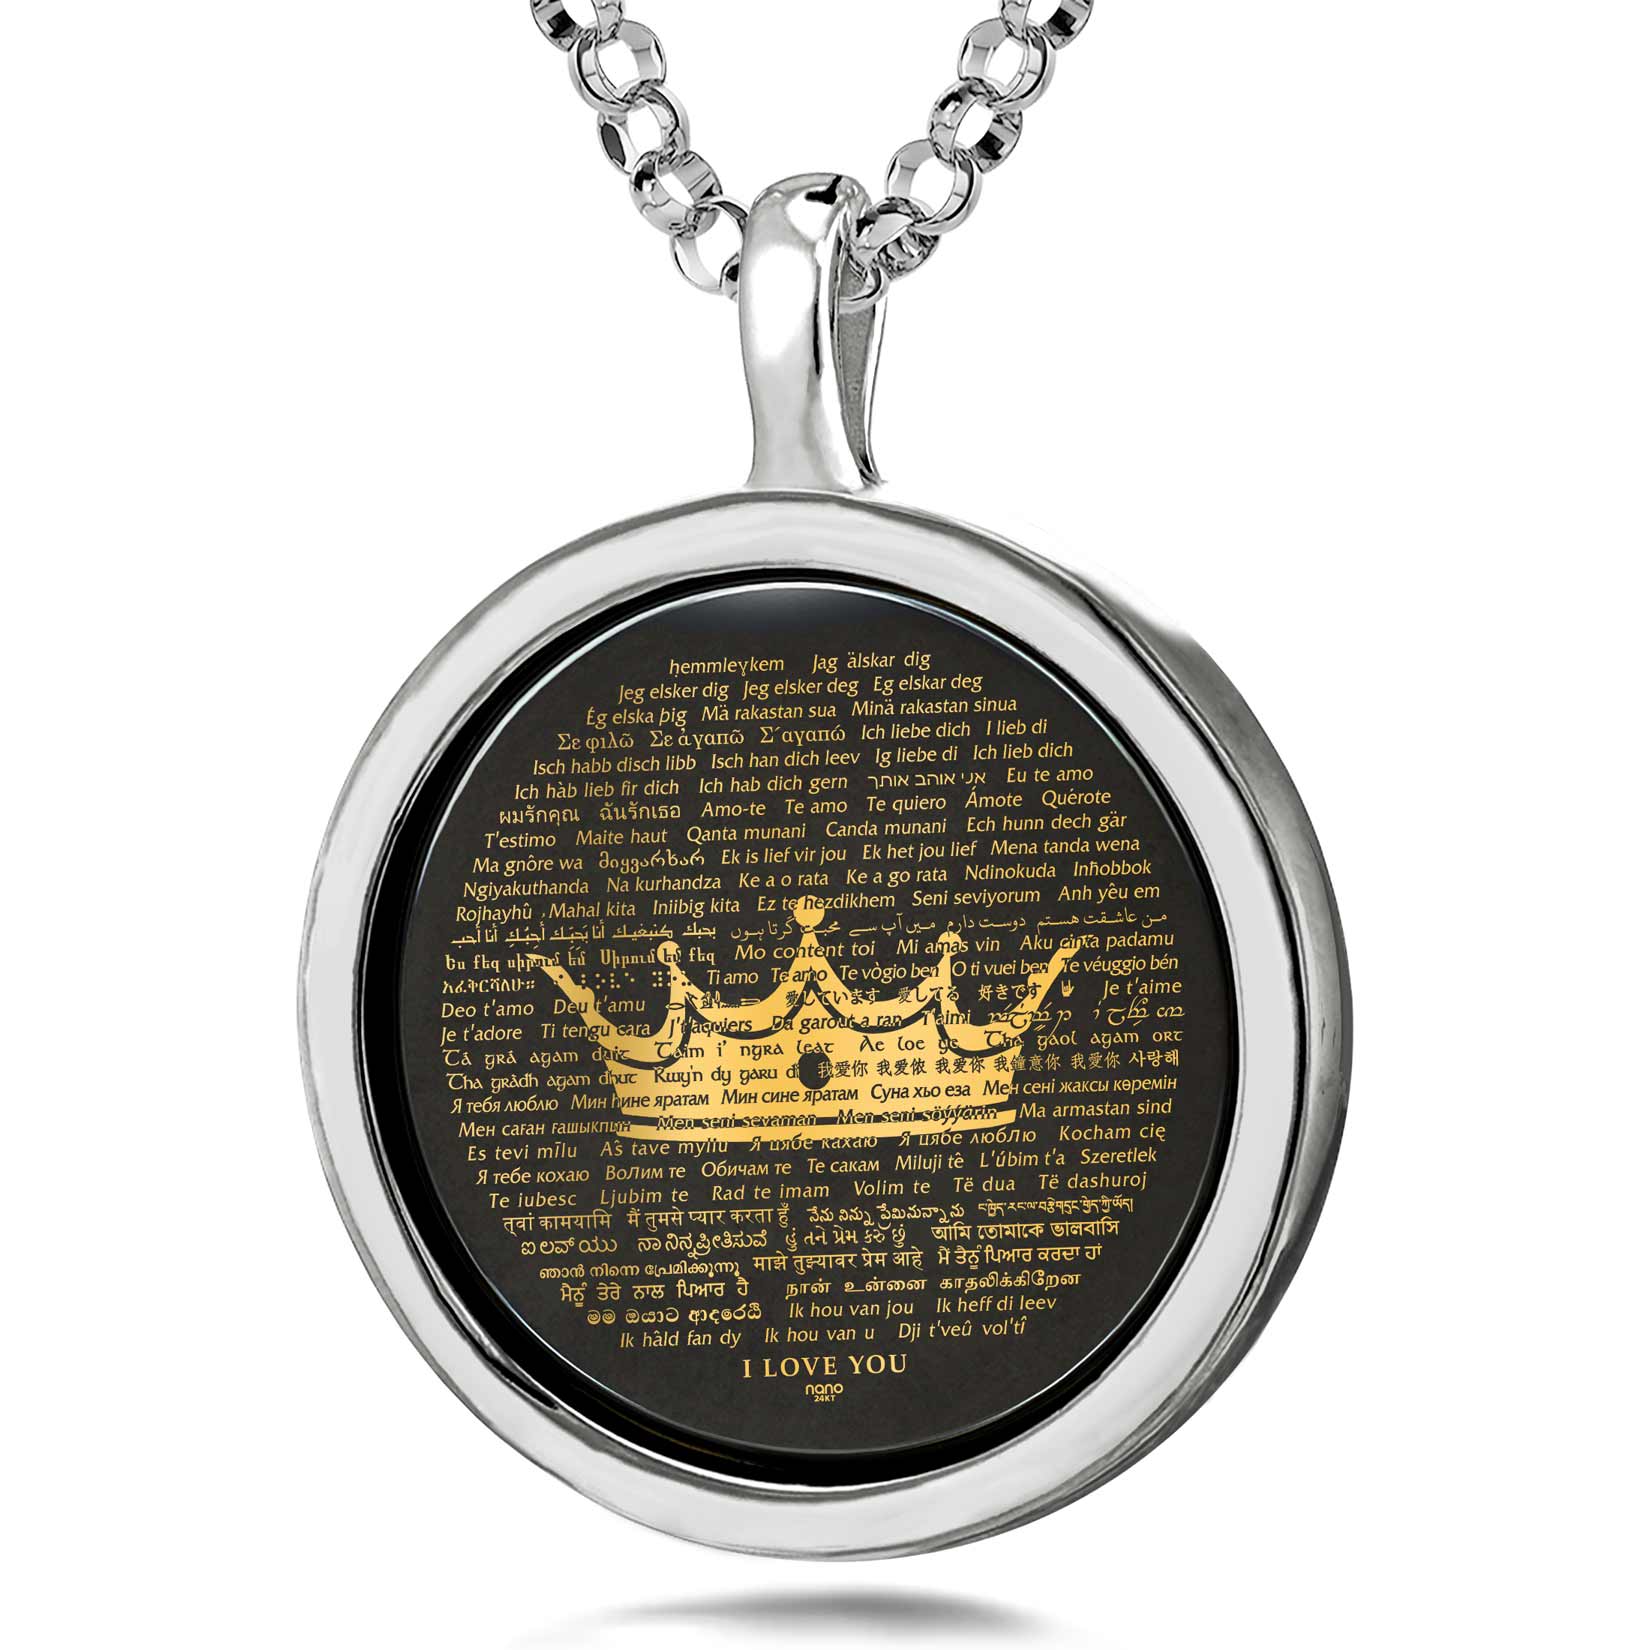 Onyx Queen Pendant - 'I Love You' in 120 Languages